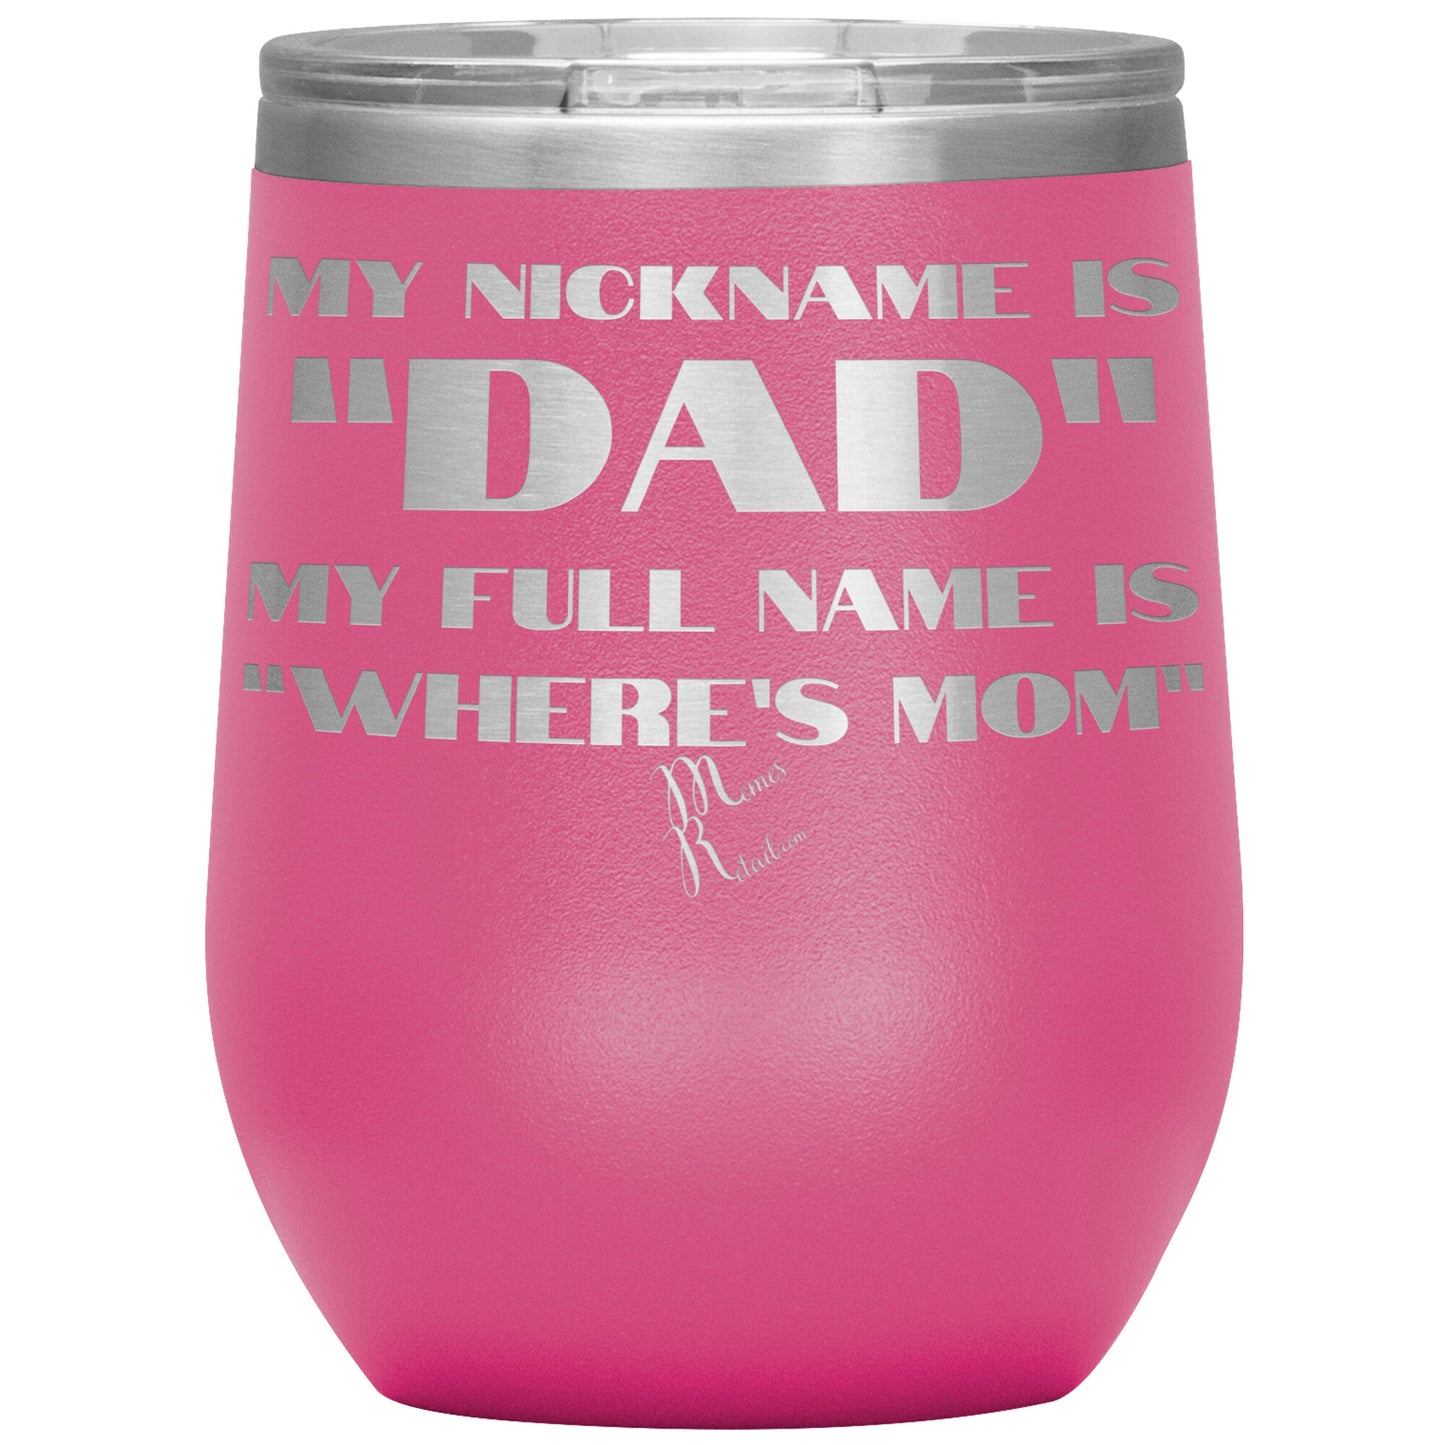 My Nickname is "Dad", My Full Name is "Where's Mom" Tumblers, 12oz Wine Insulated Tumbler / Pink - MemesRetail.com